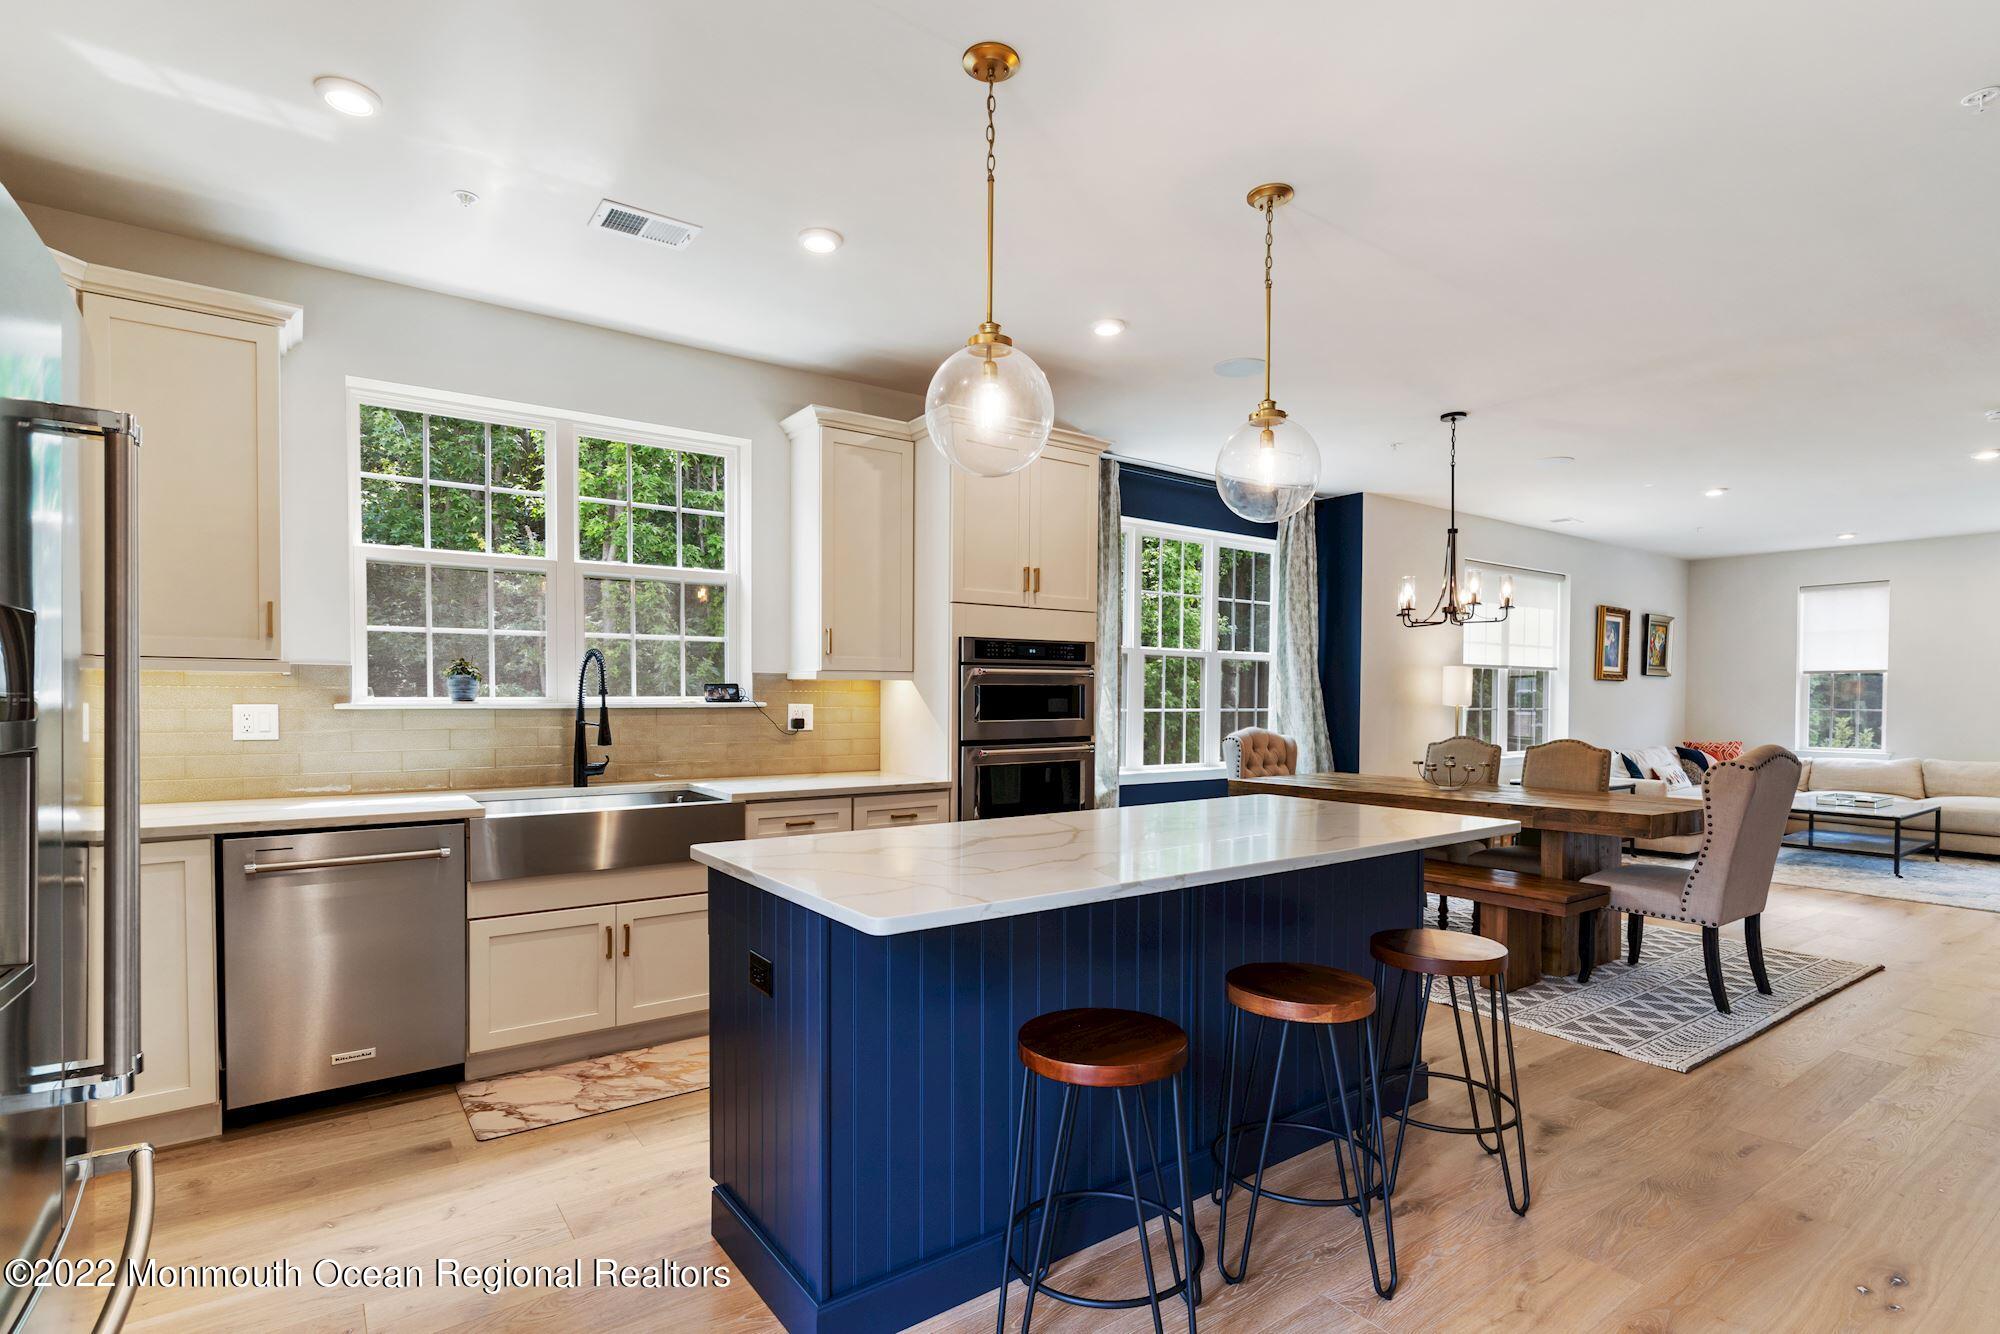 a open kitchen with stainless steel appliances granite countertop a stove top oven a sink dishwasher a dining table and chairs with wooden floor